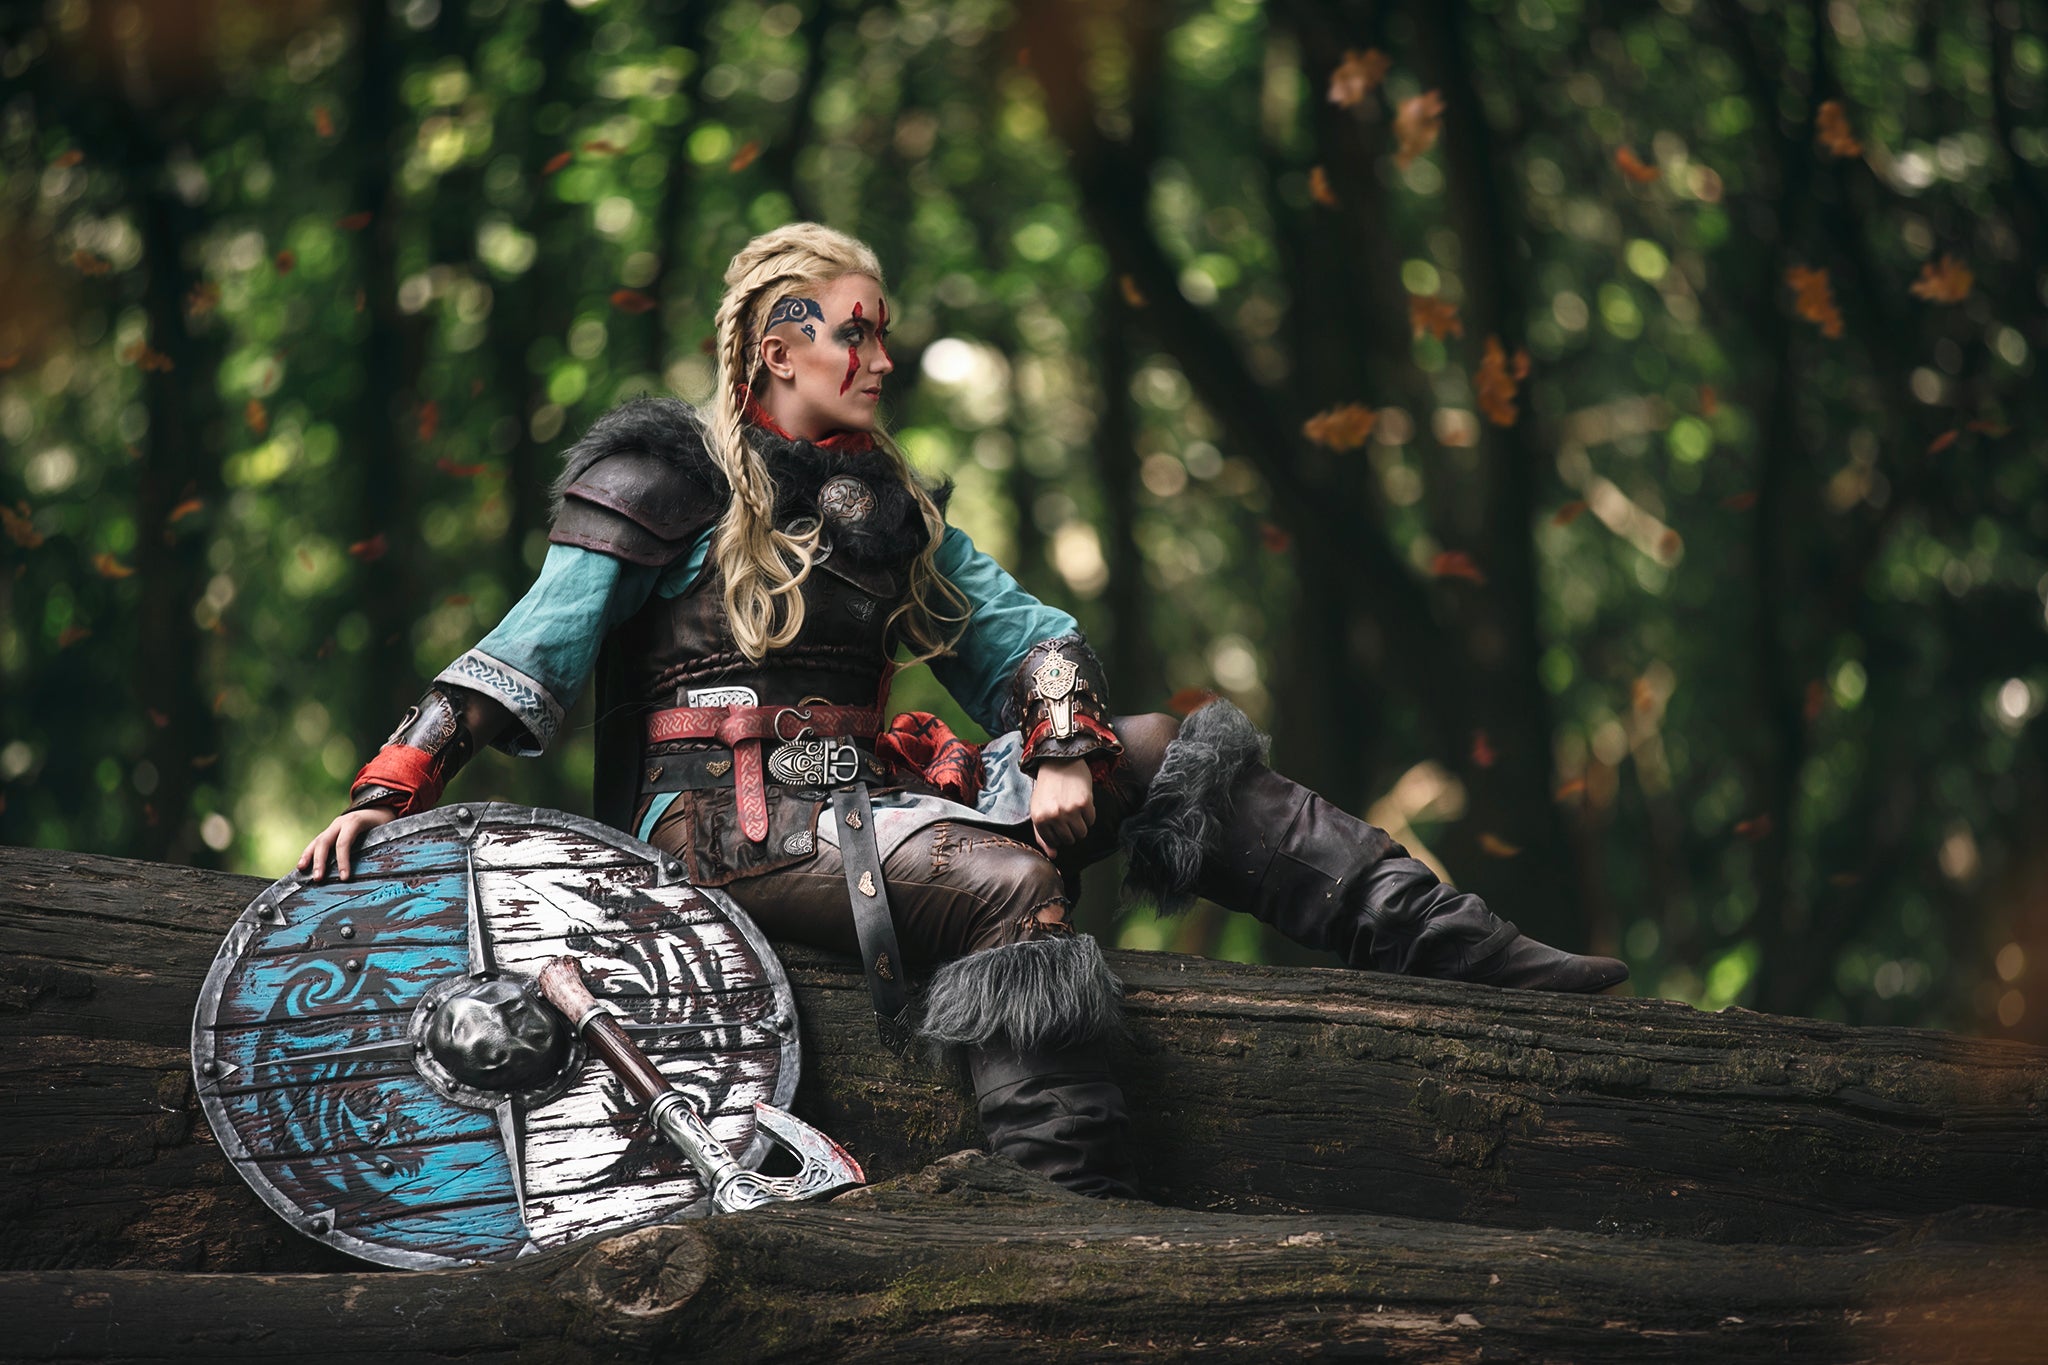 Amazonian Cosplay as Eivor From Assassin's Creed Valhalla